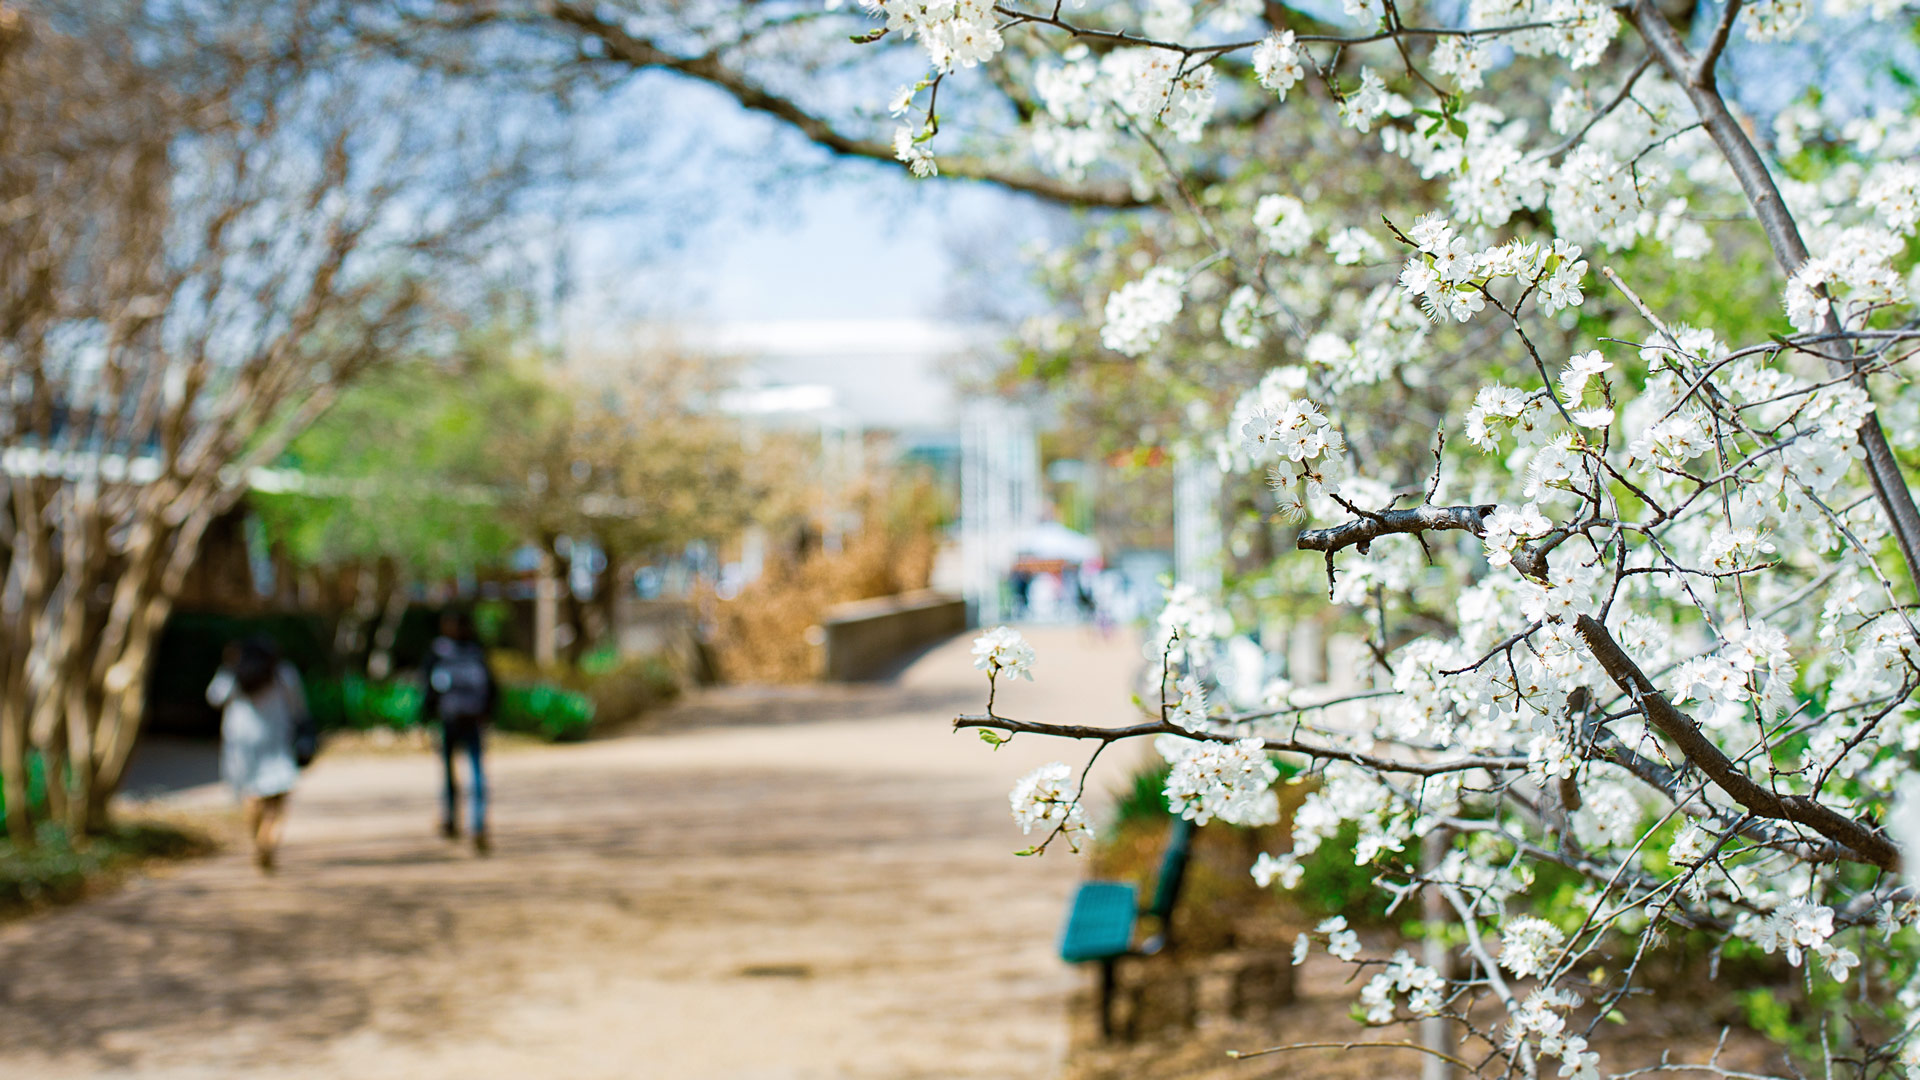 A close-up picture of a campus tree with white flowers.